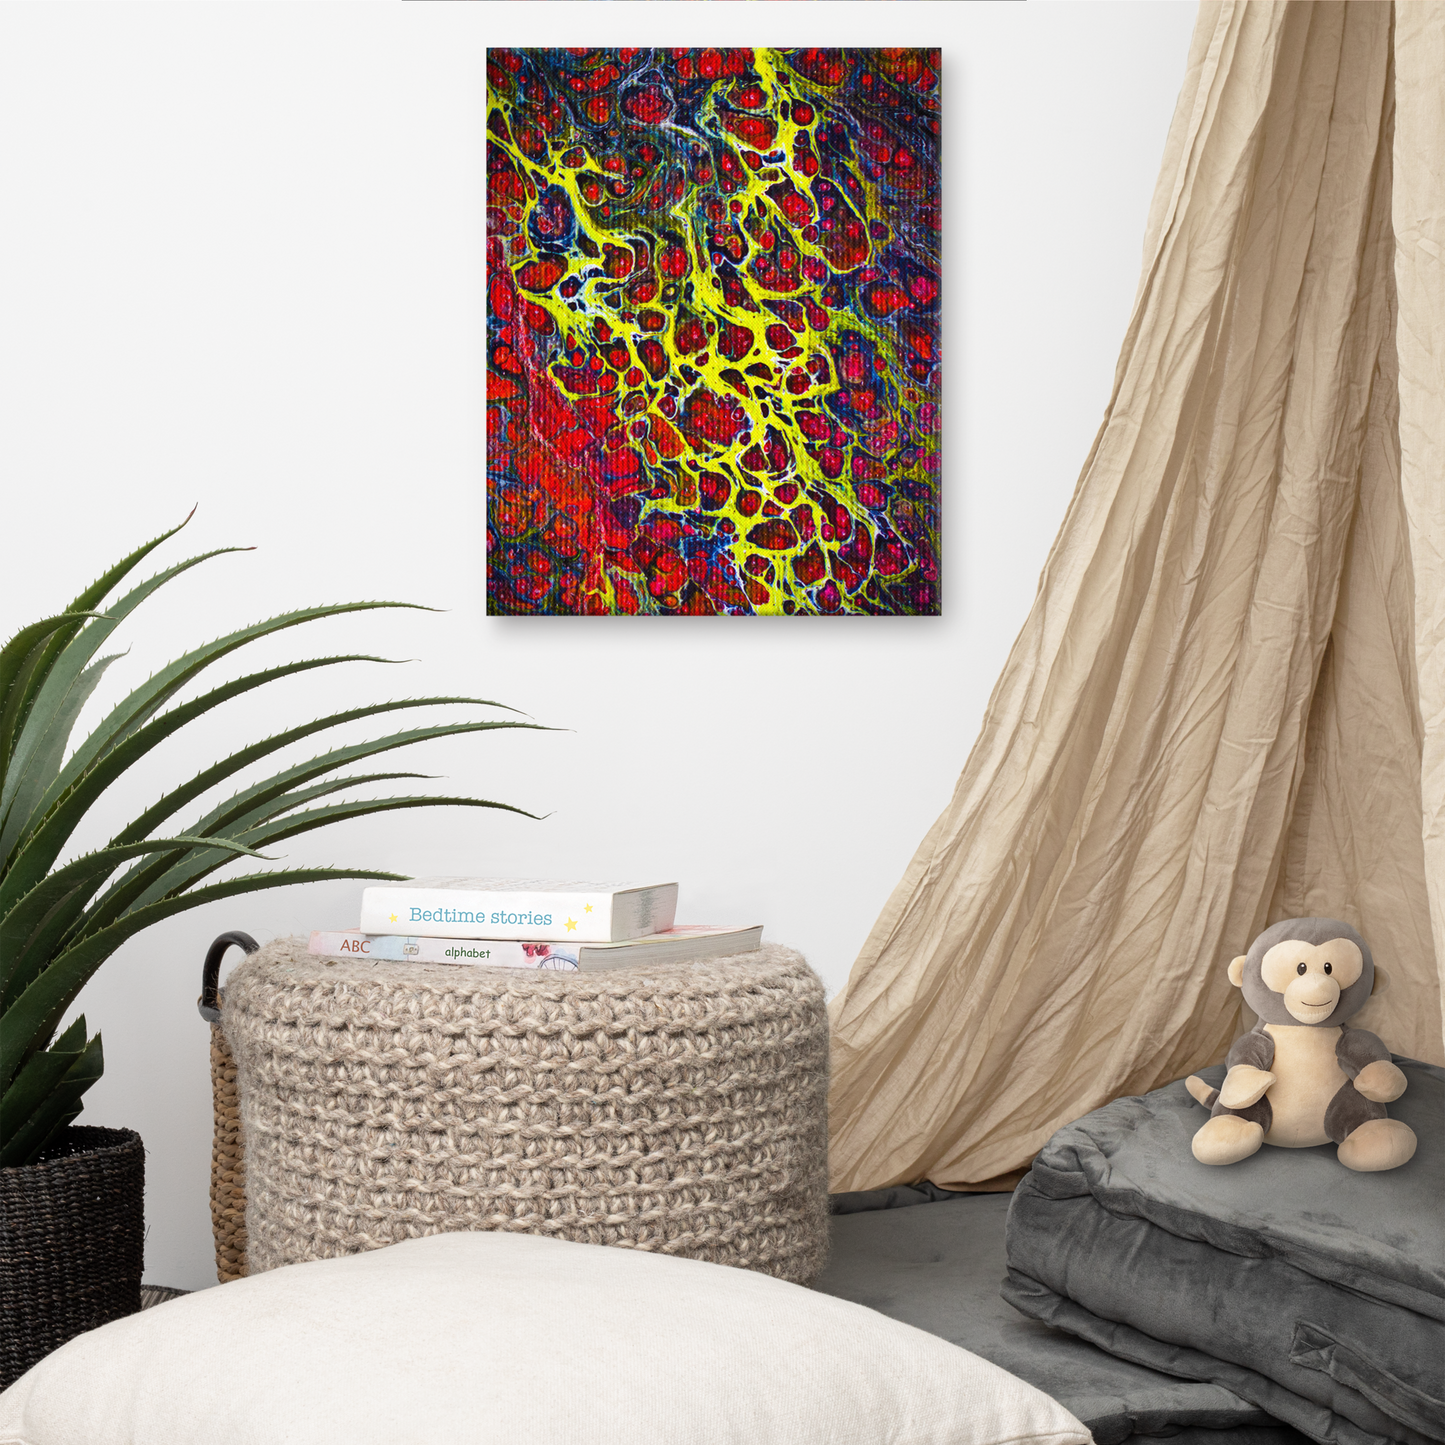 NightOwl Studio Abstract Wall Art, Crown of Thorns, Boho Living Room, Bedroom, Office, and Home Decor, Premium Canvas with Wooden Frame, Acrylic Painting Reproduction, 16” x 20”